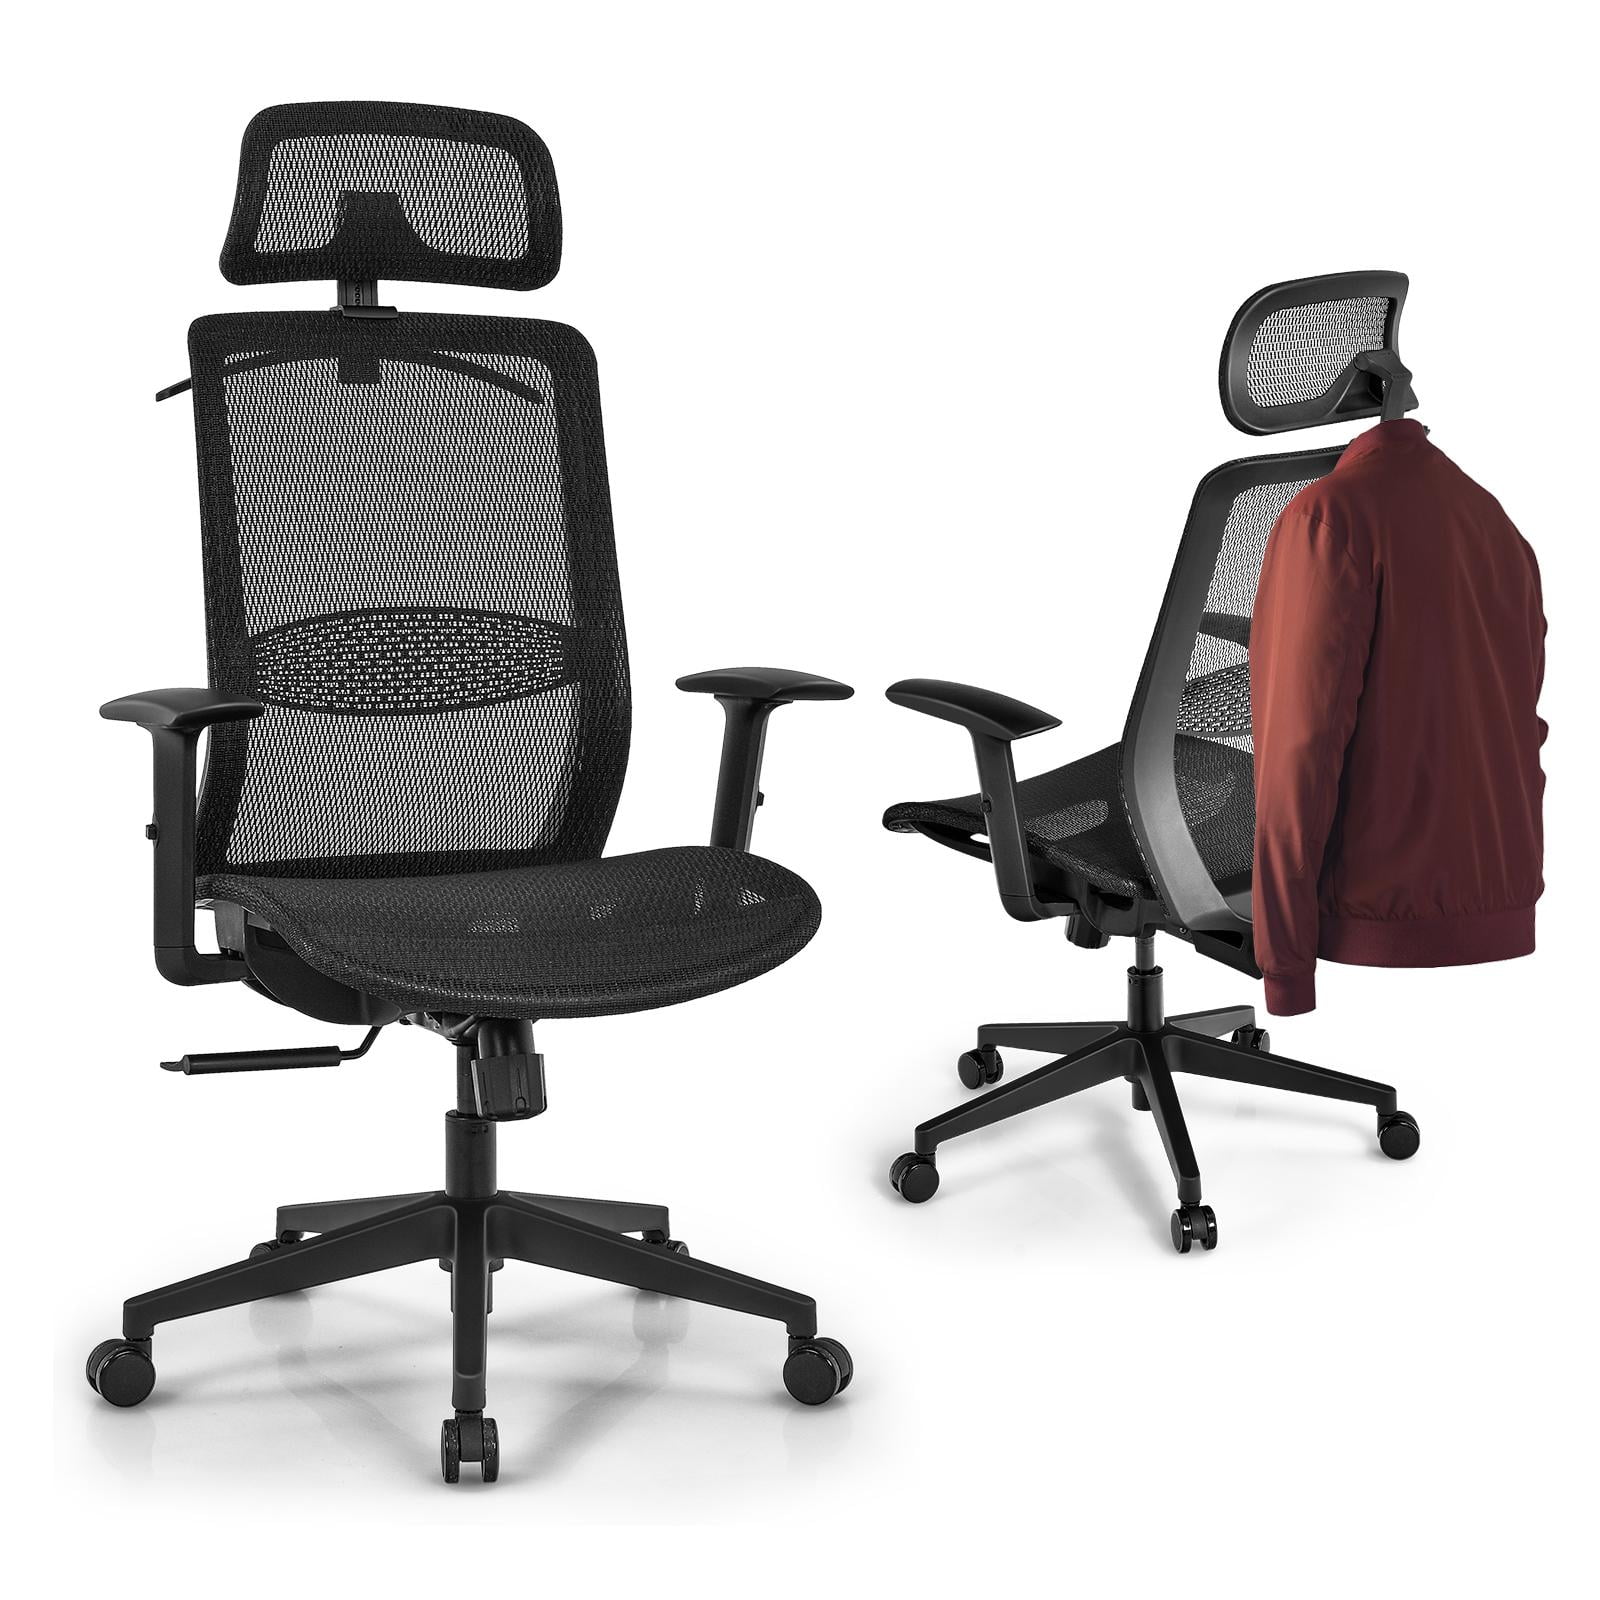 Giantex Ergonomic Office Chair w/Foldable Backrest, Mid Back Mesh Chair  with Lumbar Support, Flip up Arms, Swivel Rolling Executive Task Chair